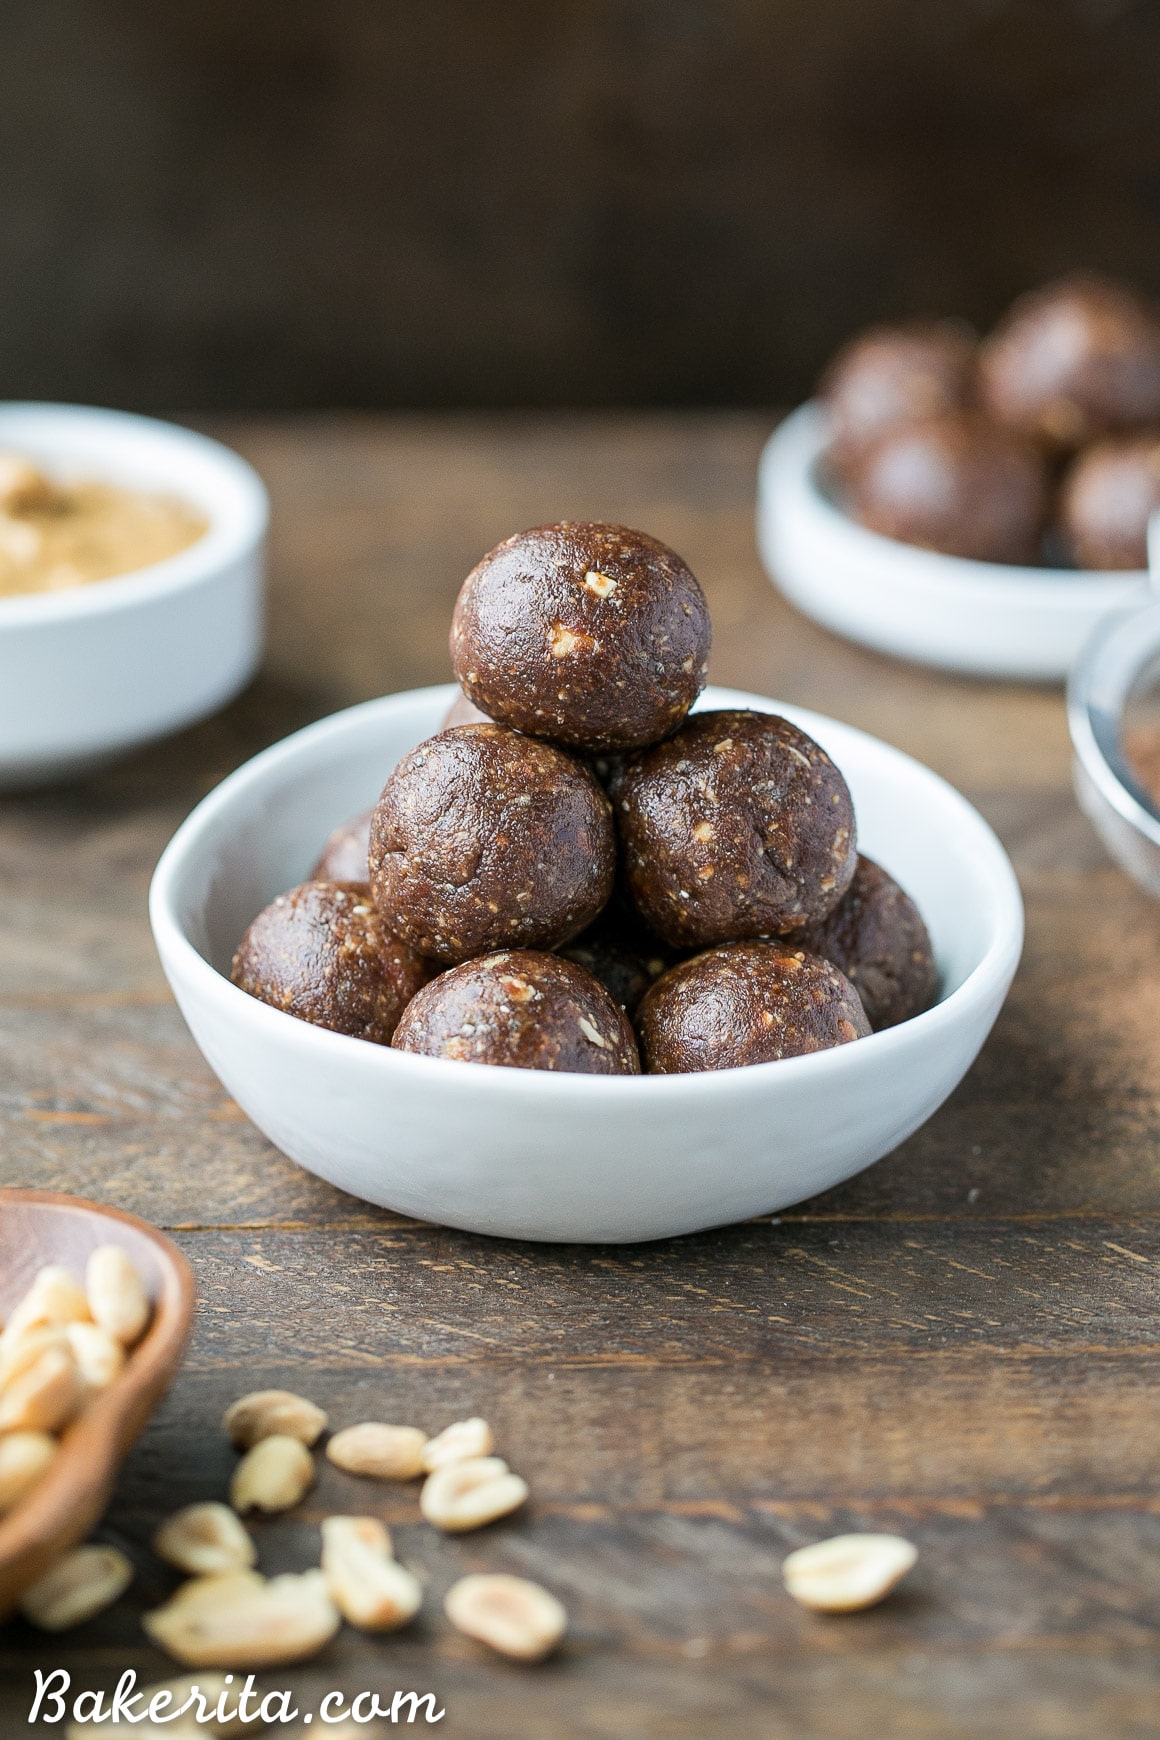 These Chocolate Peanut Butter Energy Bites have just 5 ingredients and are sweetened with dates! These easy energy bites come together in only 10 minutes and they're gluten-free, refined sugar free + vegan.